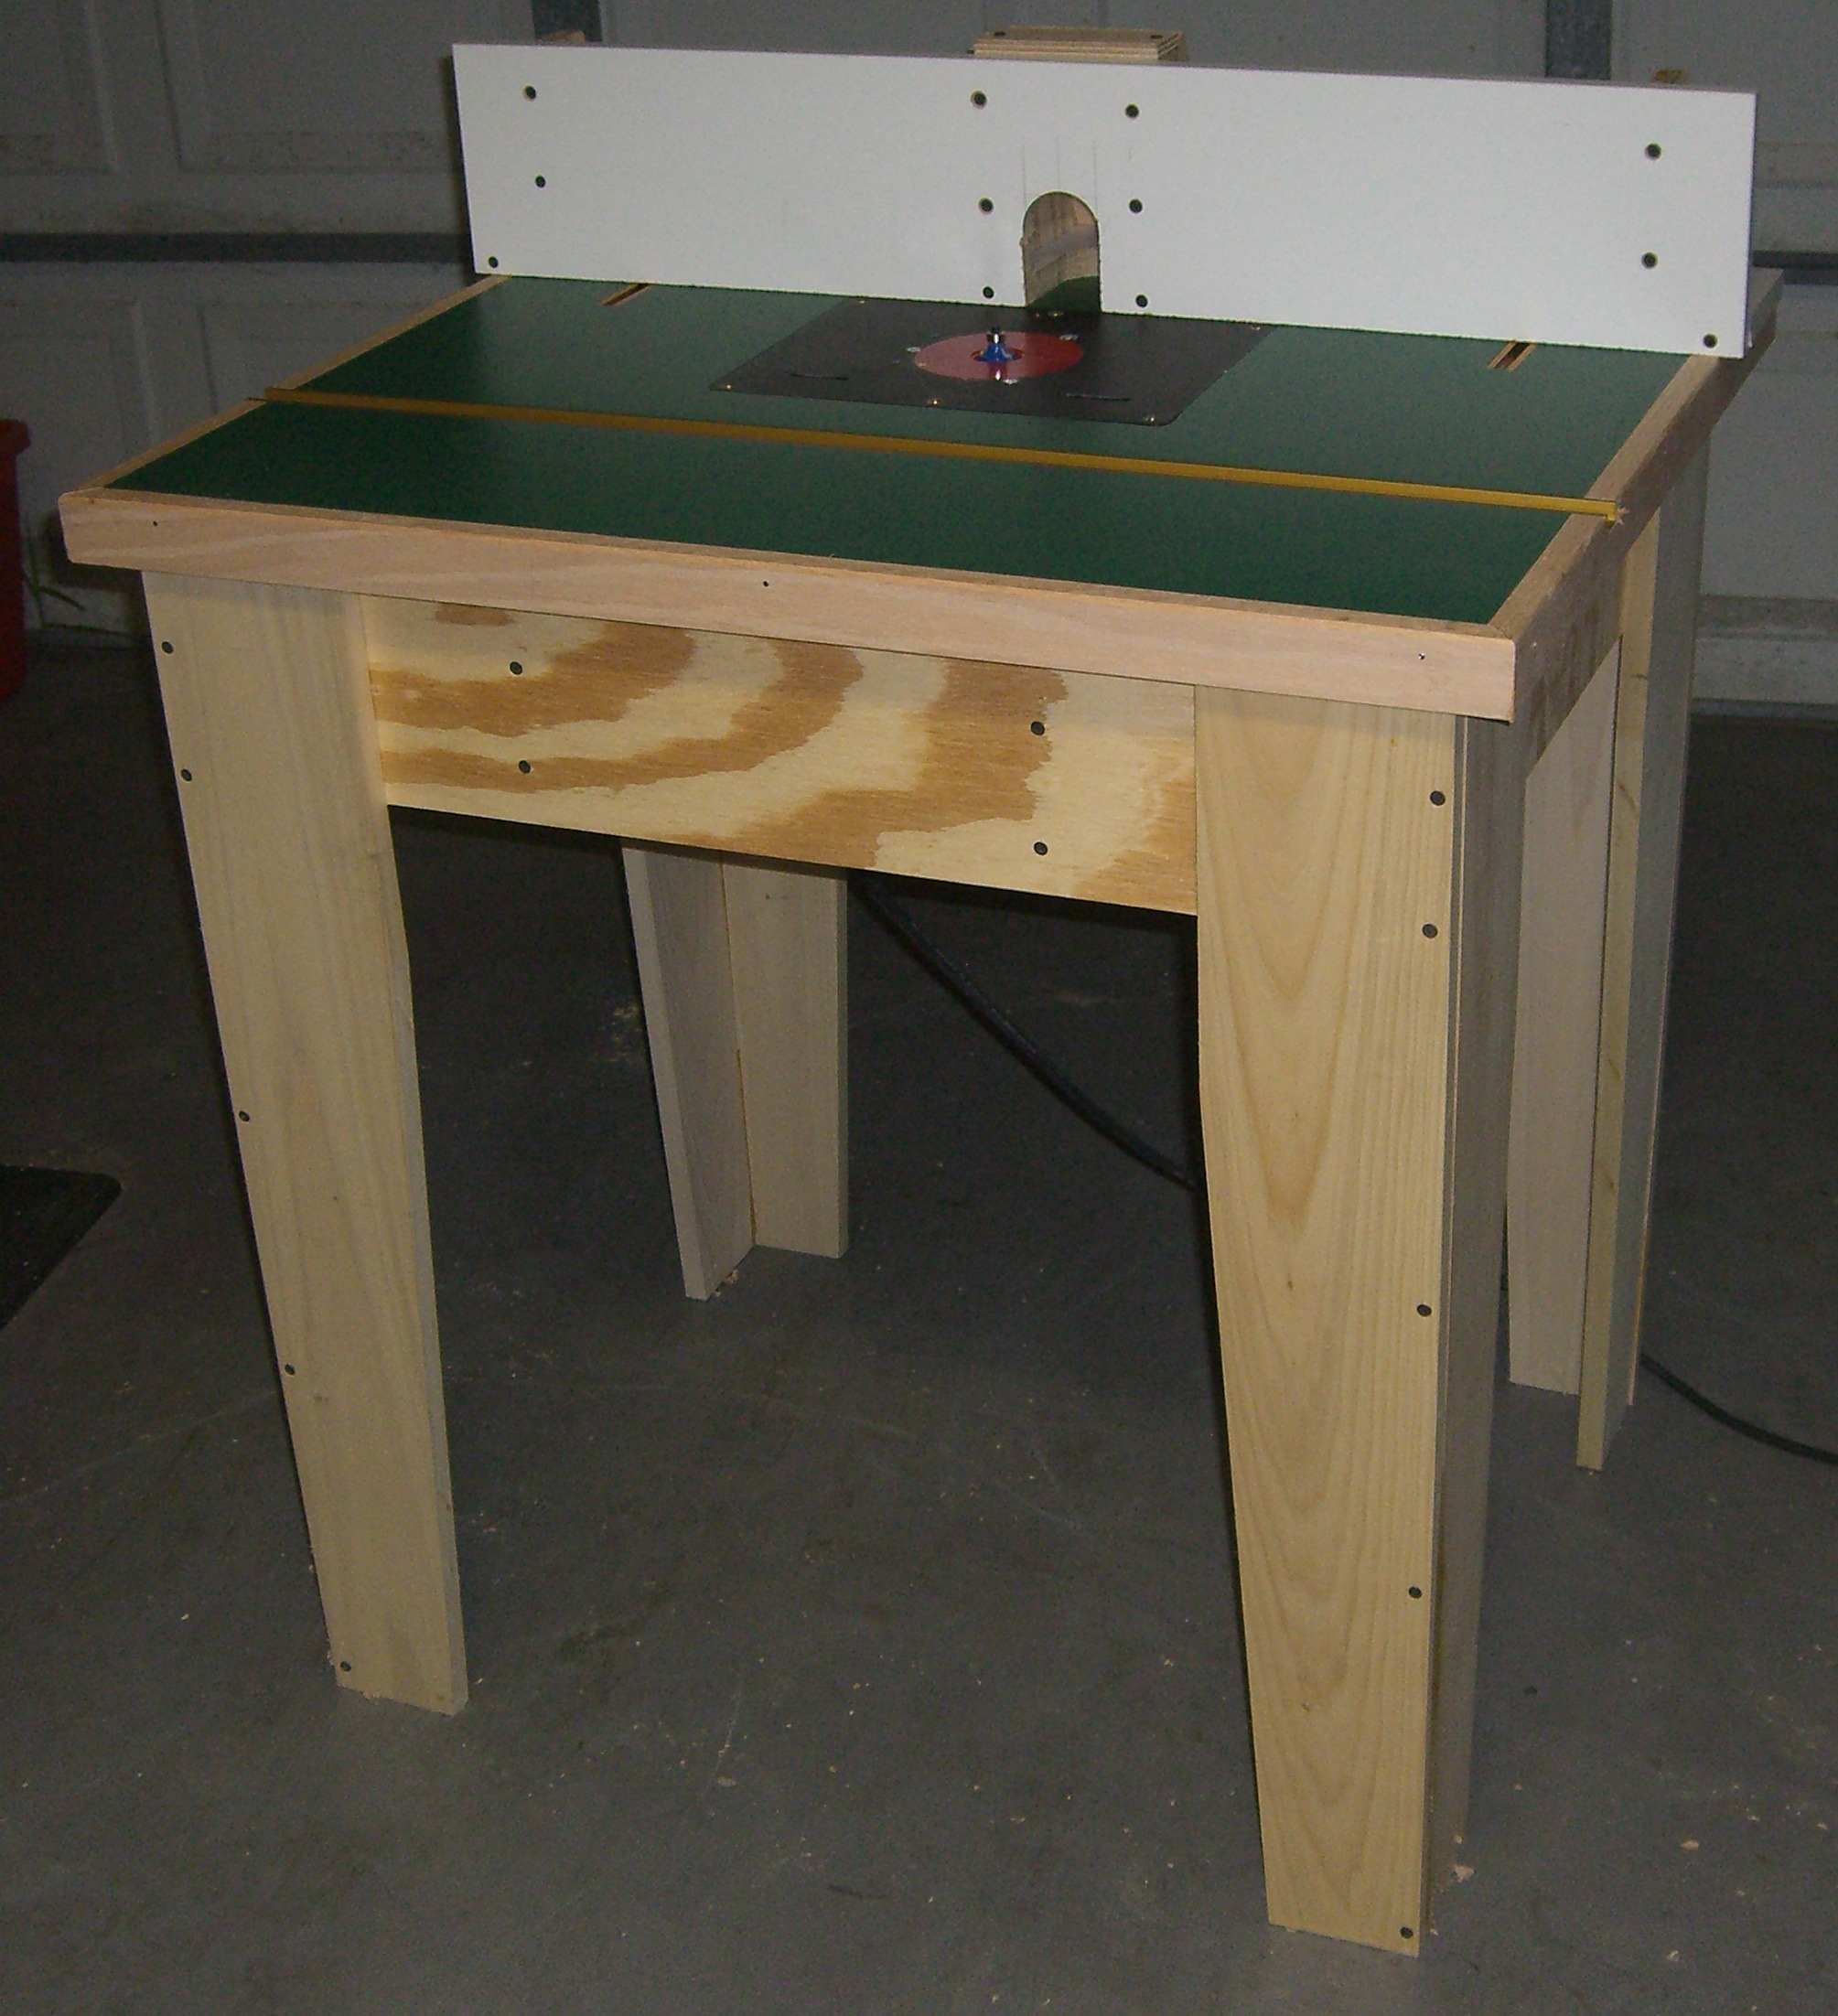 Completed Router Table